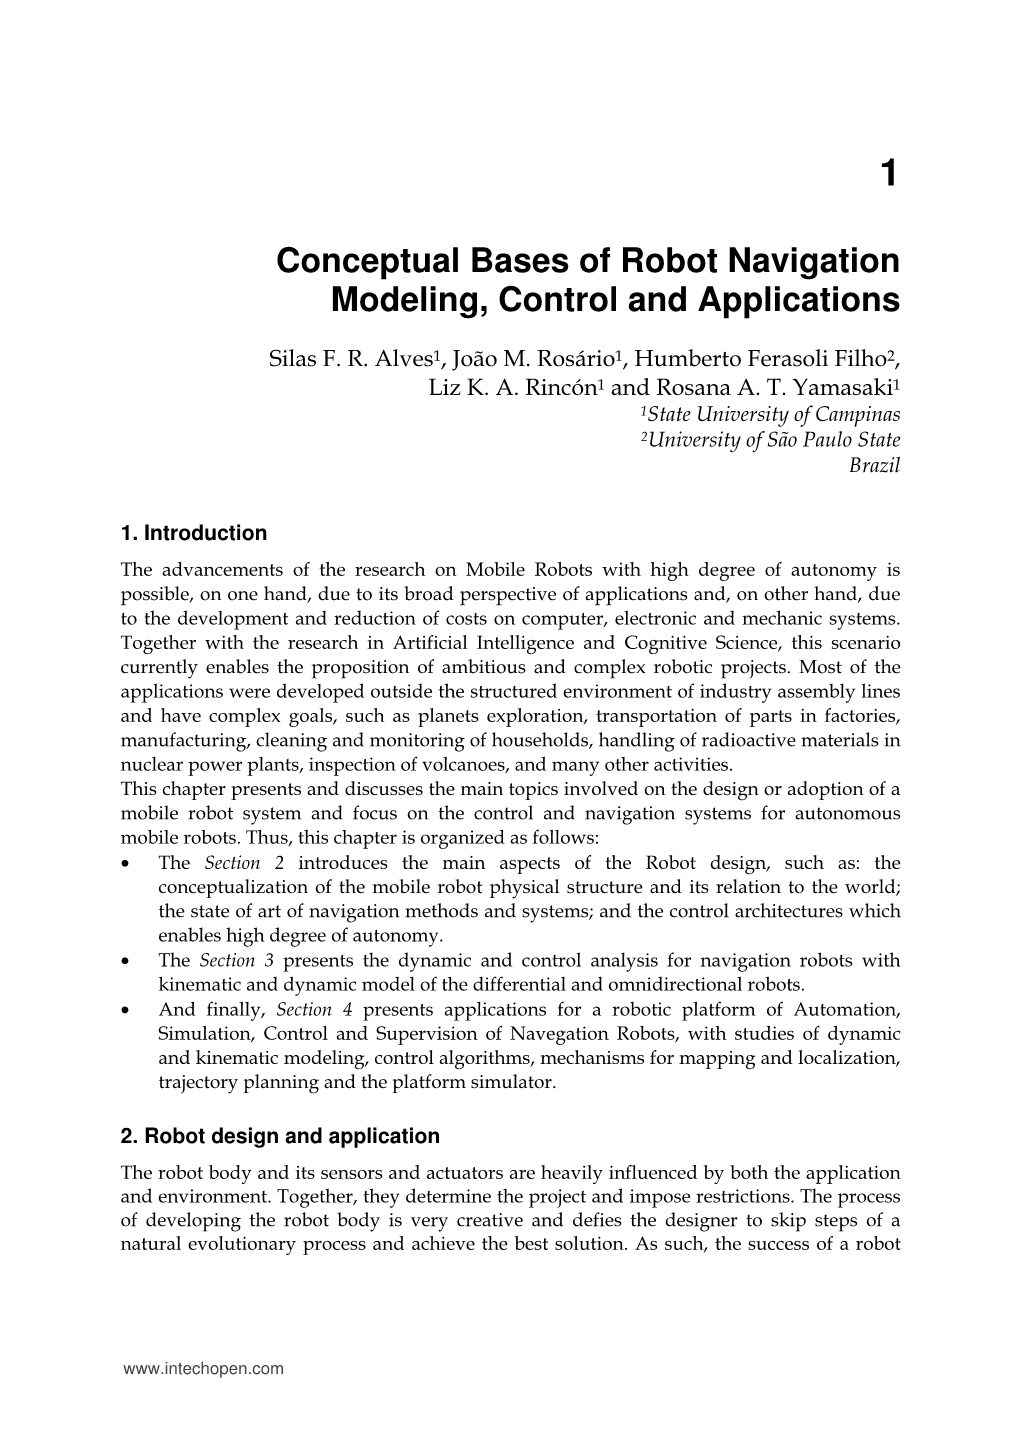 Conceptual Bases of Robot Navigation Modeling, Control and Applications